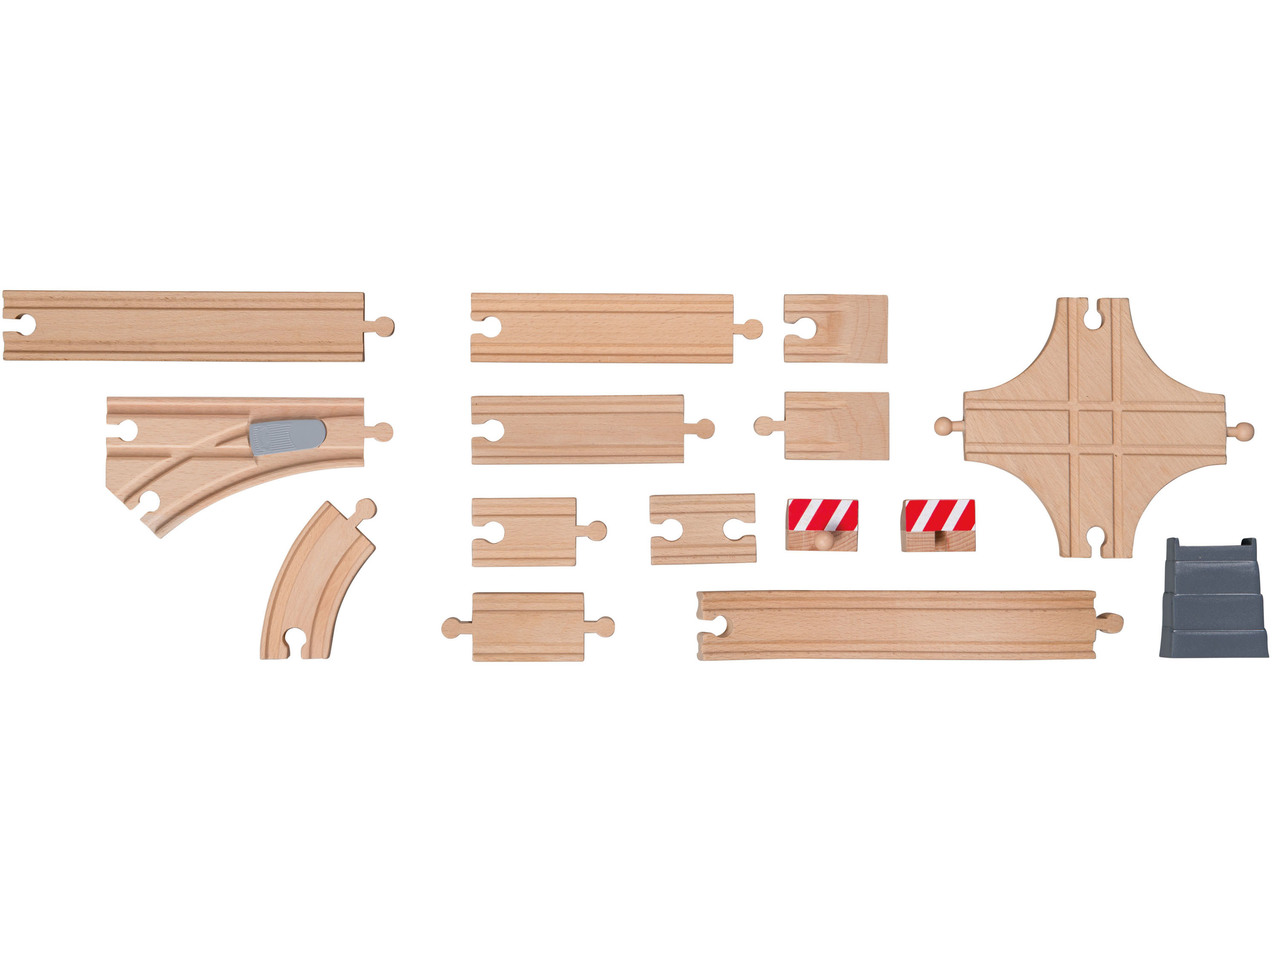 A Multistorey Car Park, Airport Or Wooden Tracks